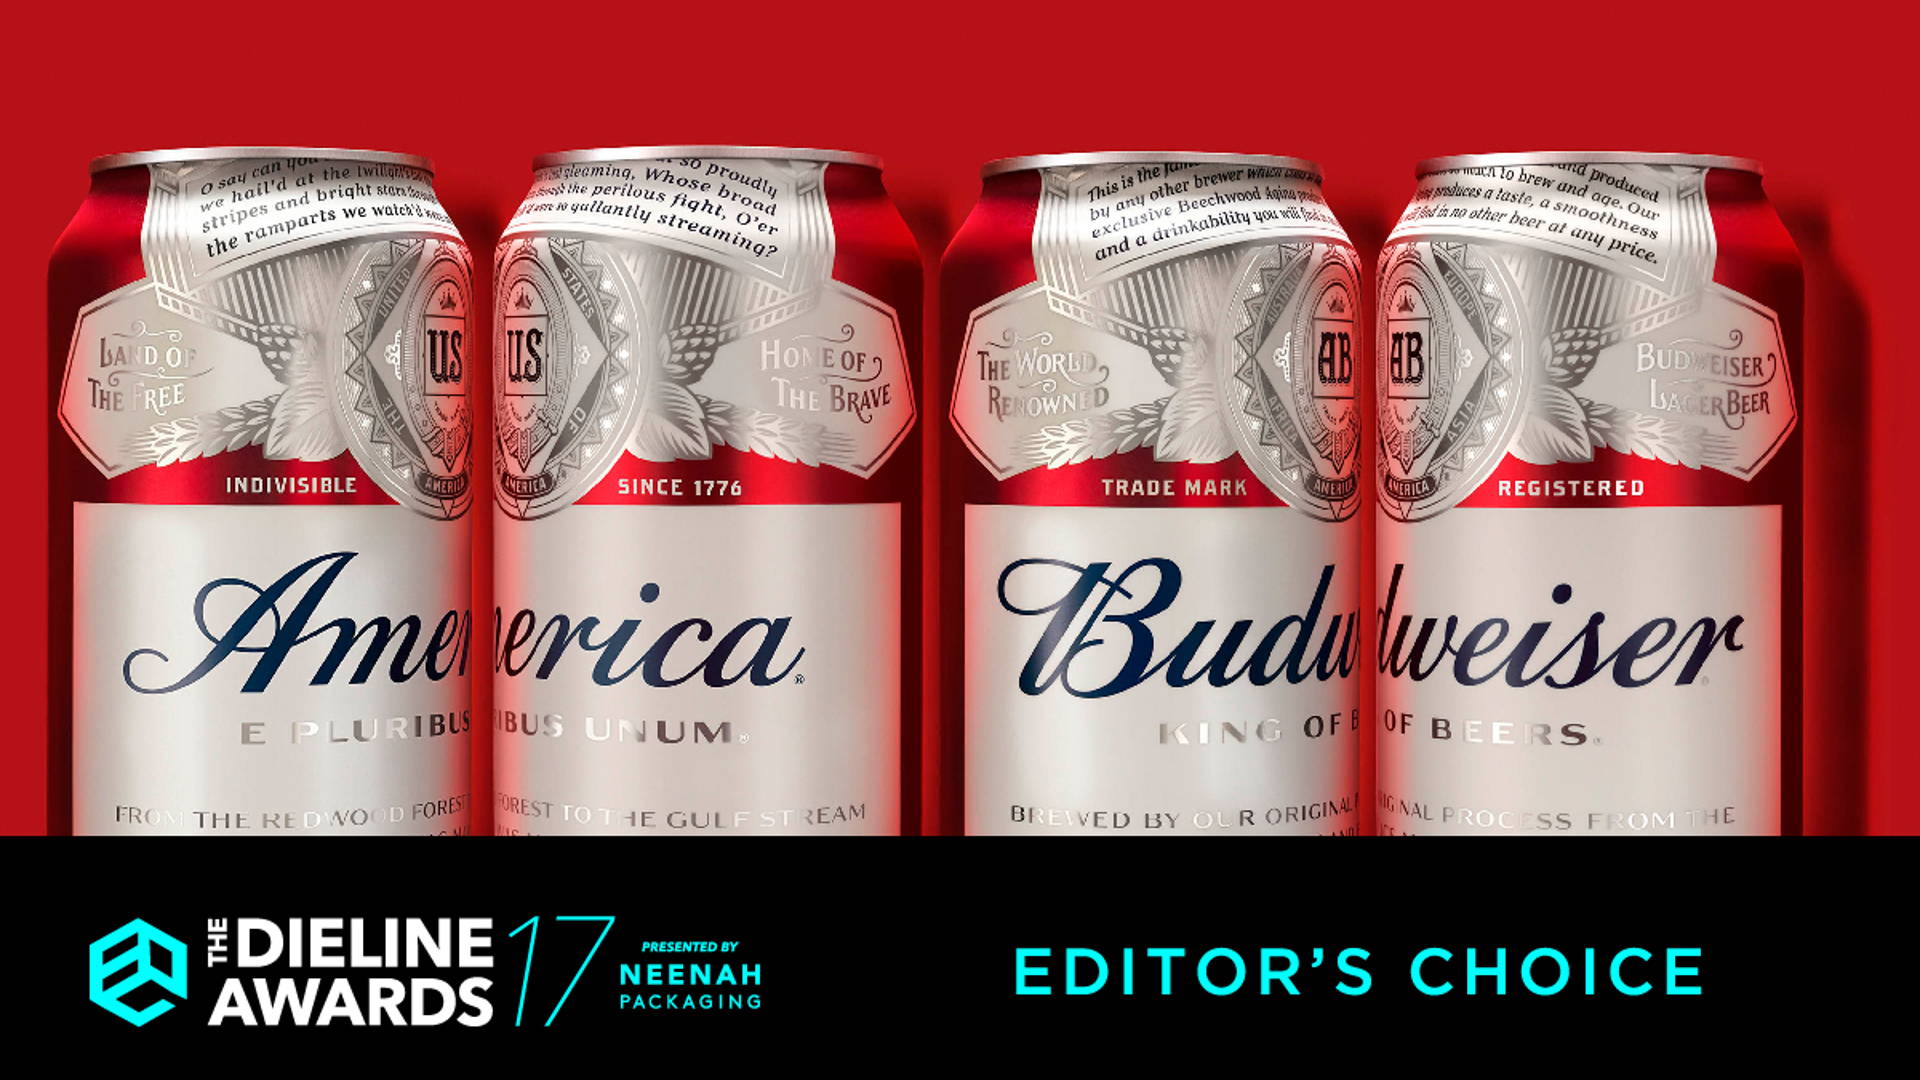 Featured image for The Dieline Awards 2017: America Beer (Budweiser)